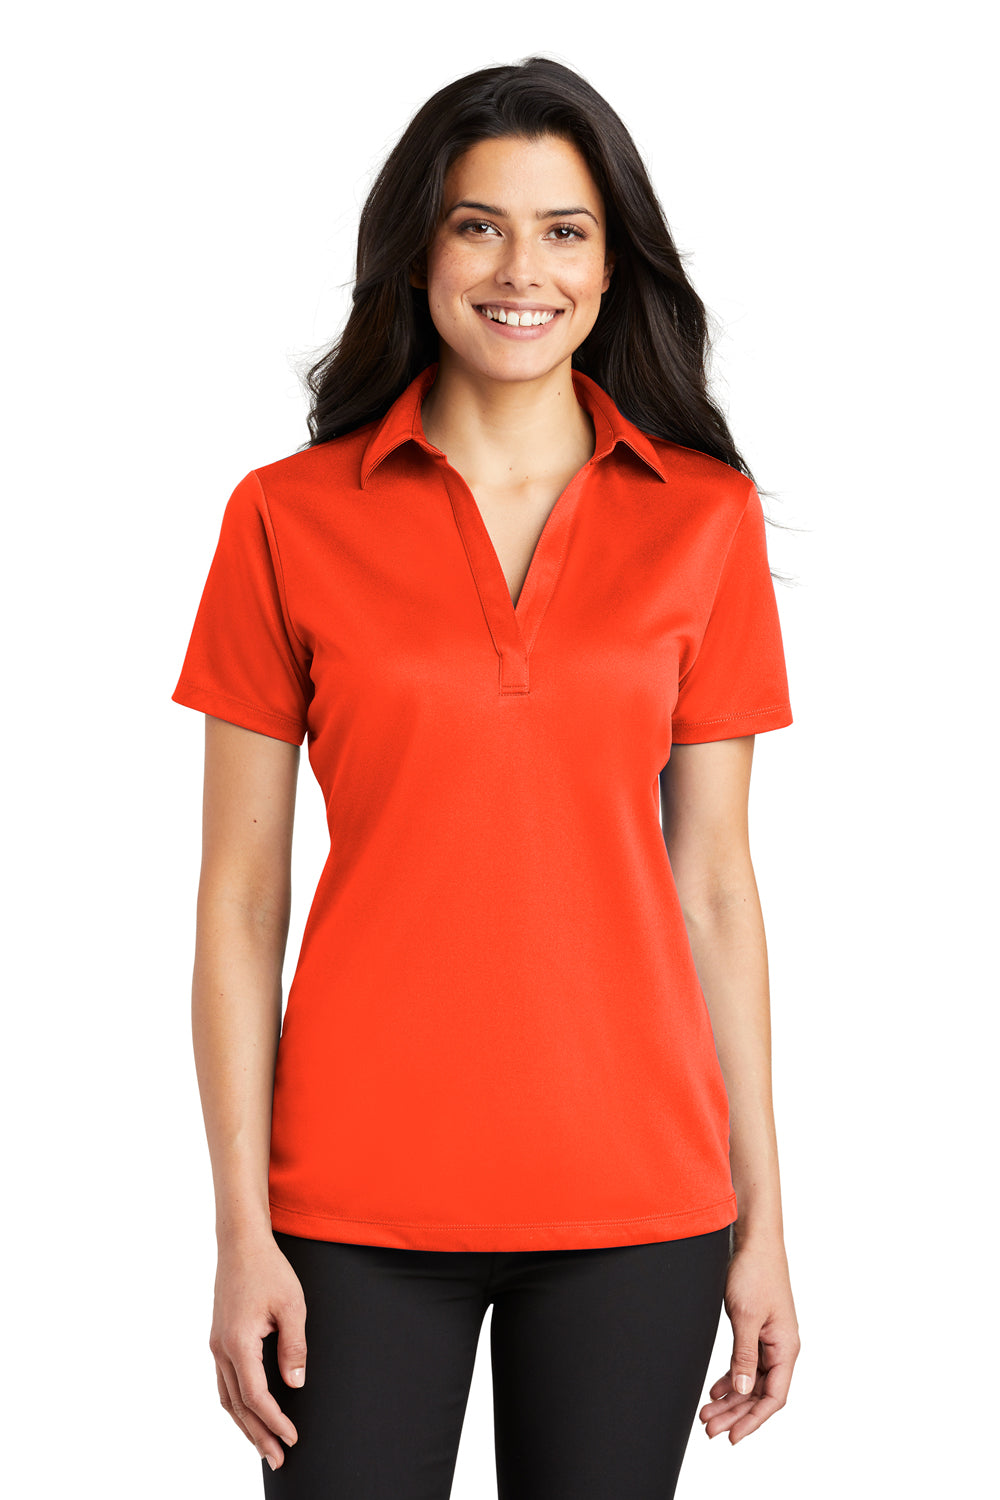 Port Authority L540 Womens Silk Touch Performance Moisture Wicking Short Sleeve Polo Shirt Neon Orange Front